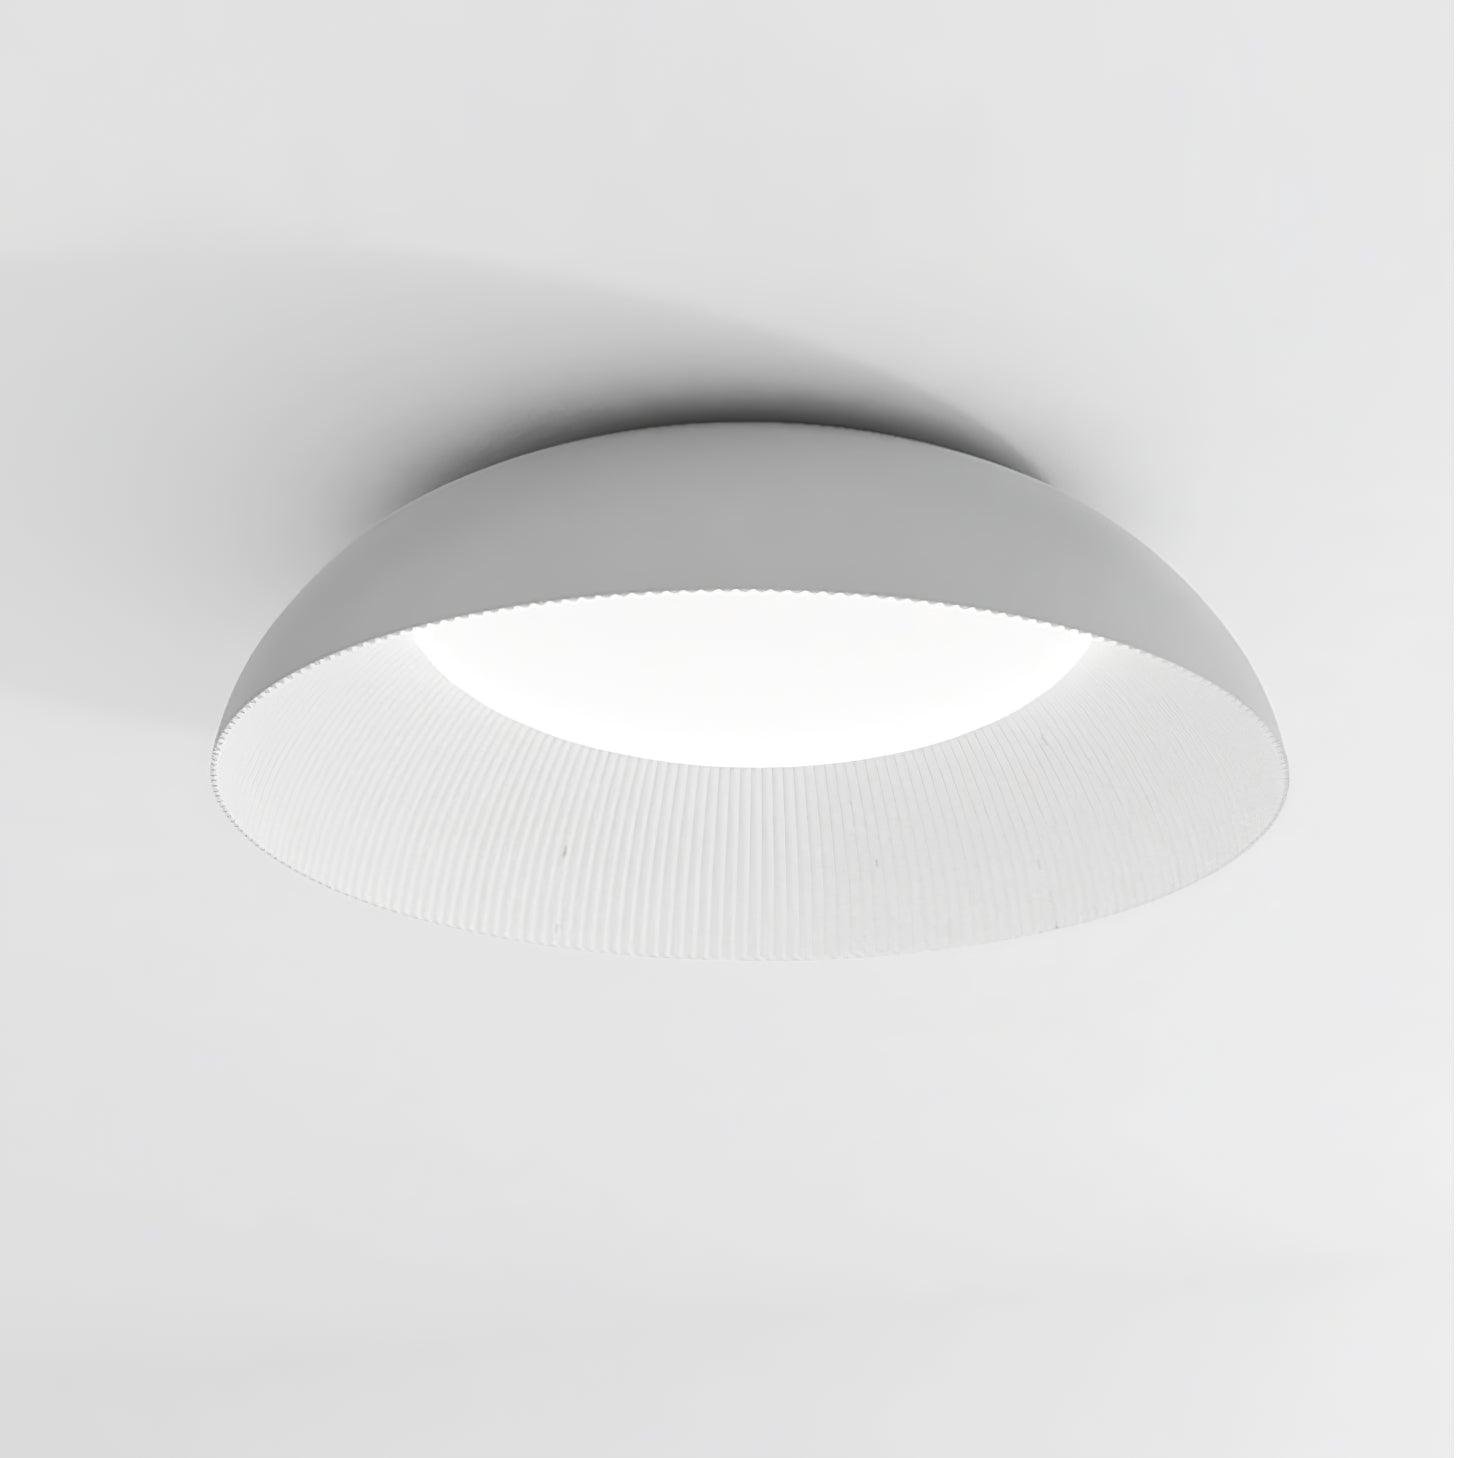 White Lindby Juliven LED Ceiling Light with Cool White Light, 45cm Diameter x 14cm Height (17.7″ Ø x 5.5″ H)